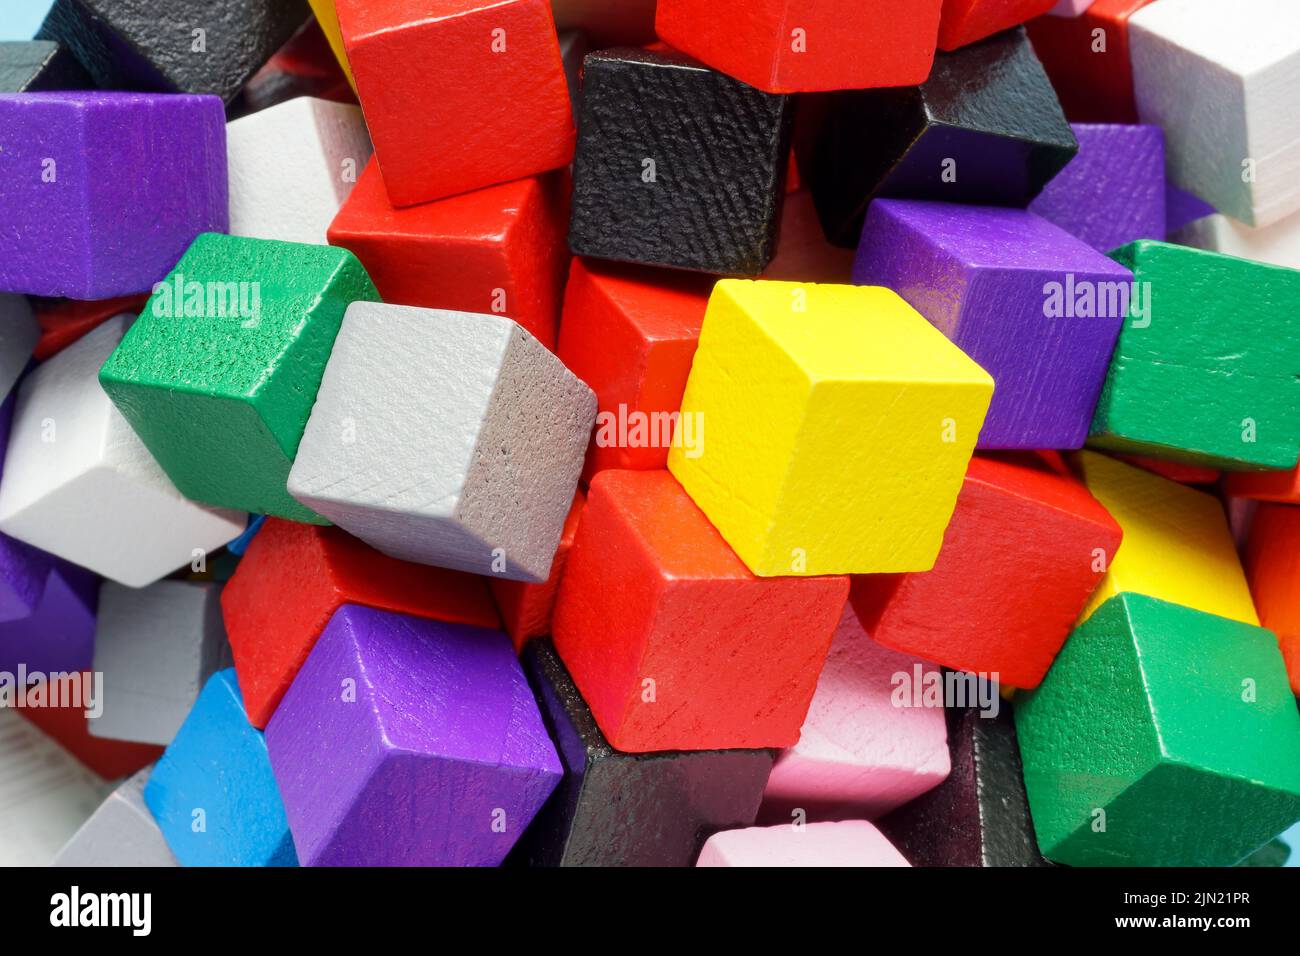 Lots of colored cubes. Abstract concept of complexity and chaos. Stock Photo